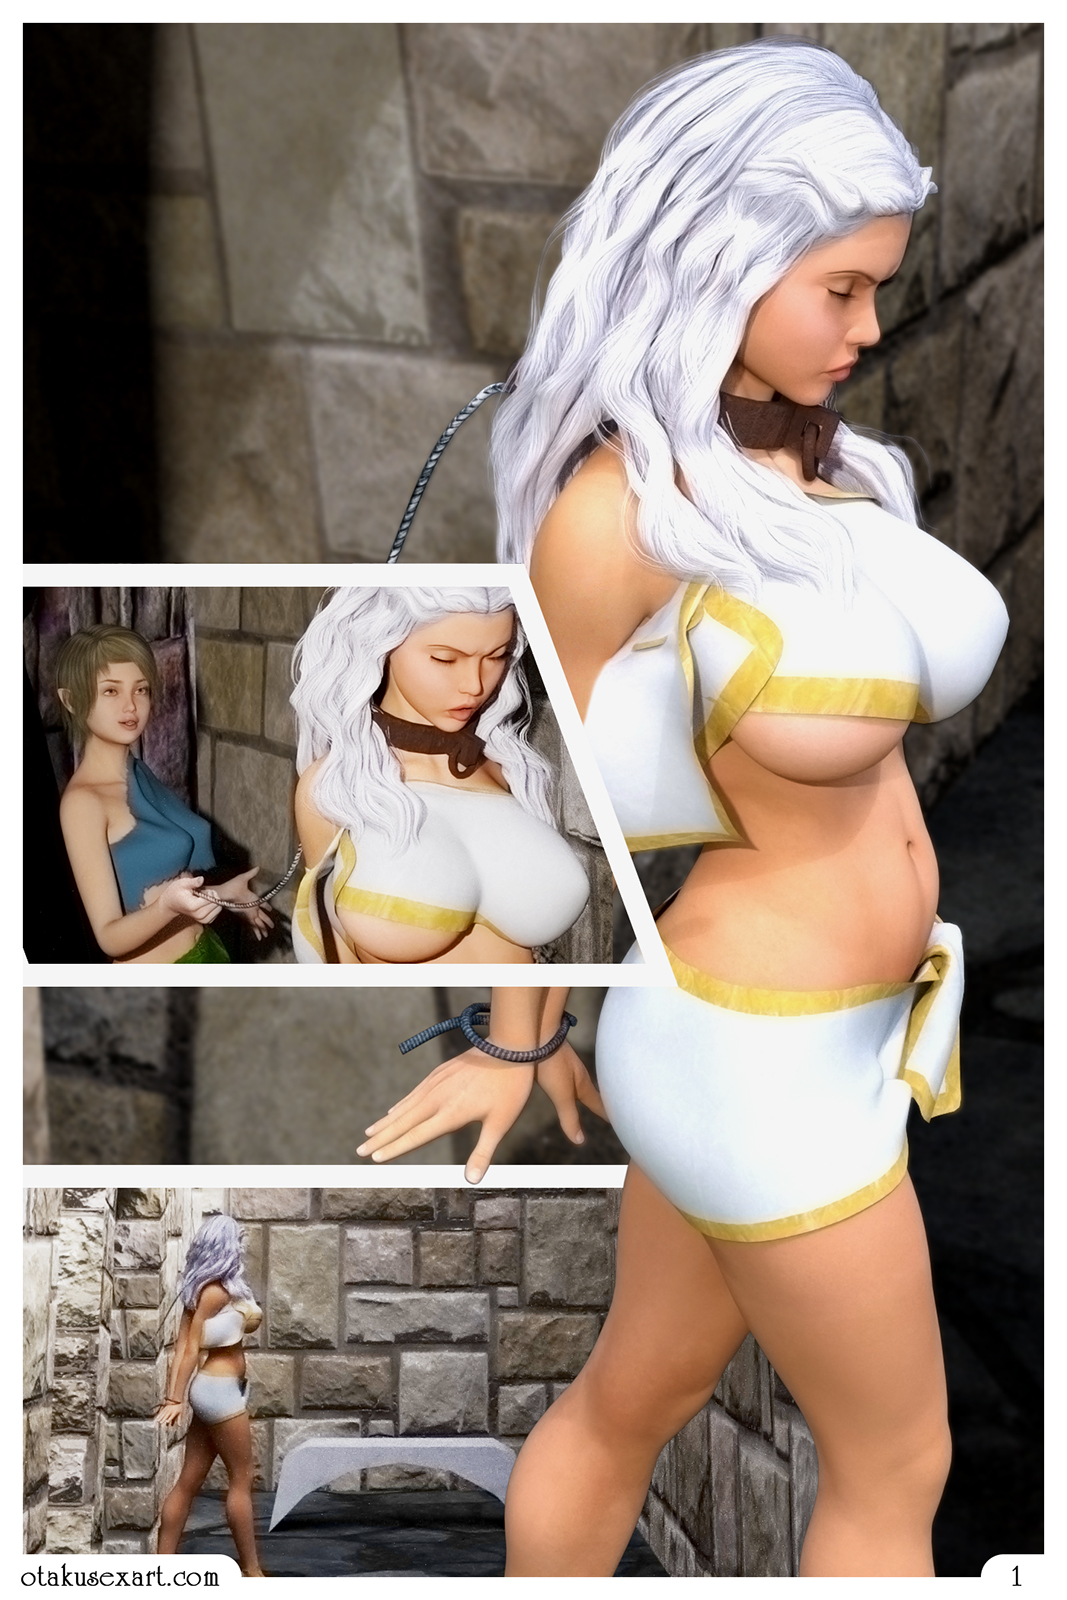 Looking for trouble two â€“ 3d hentai porn sex comic â€“ page 1 | Otaku Sex Art